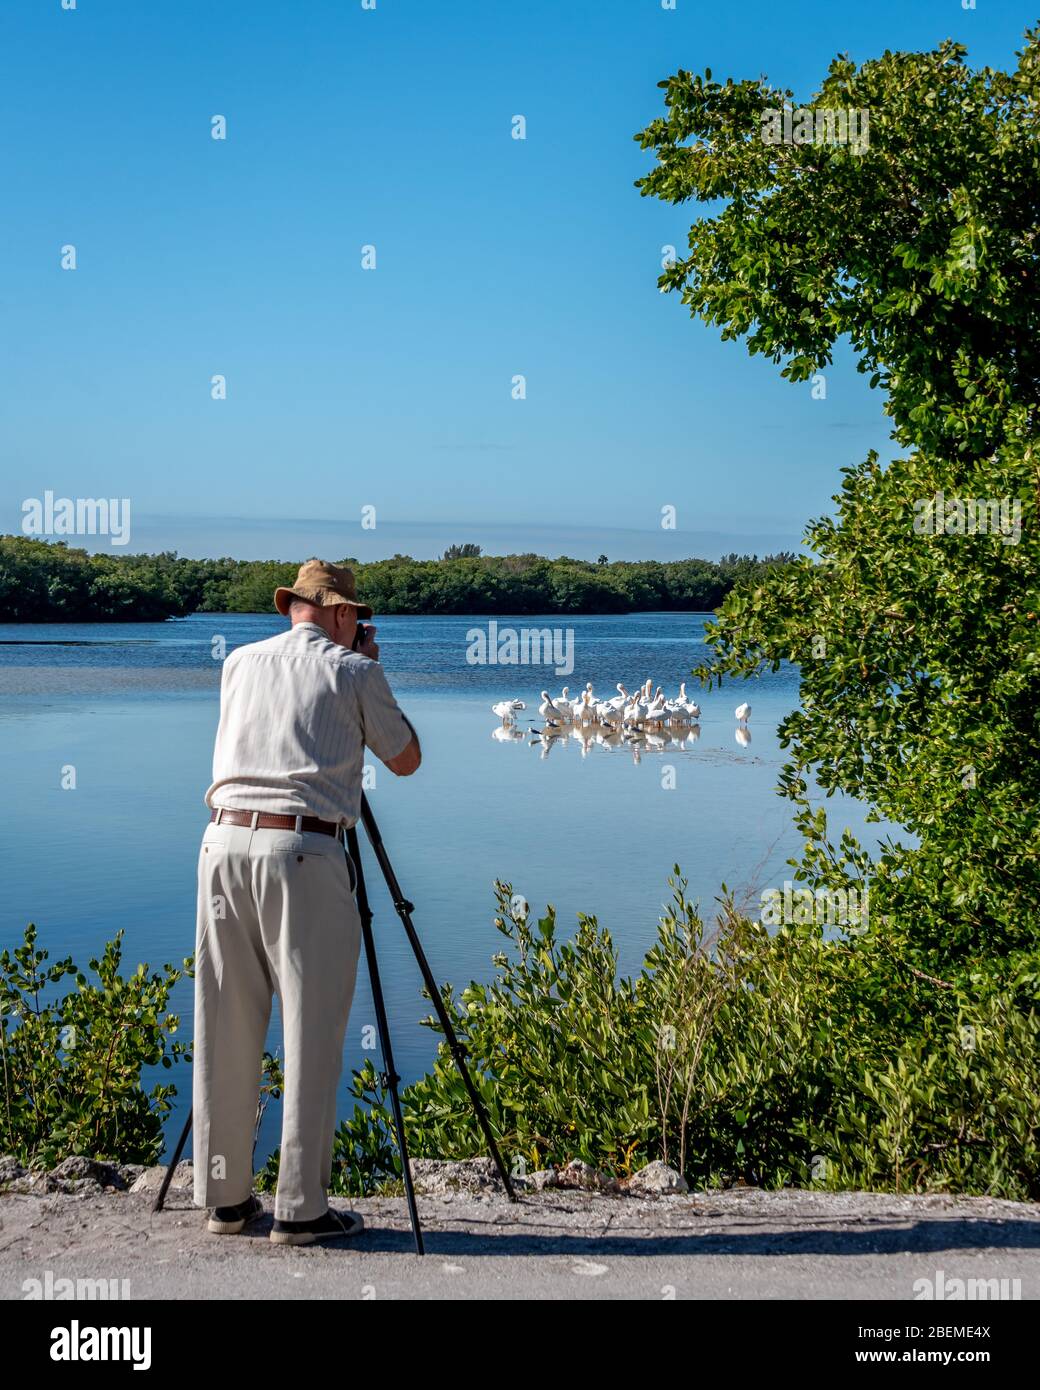 A senior man tourist photographs white pelicans on a Florida birdwatching vacation, during visit to Ding Darling Wildlife Refuge on Sanibel Island. Stock Photo